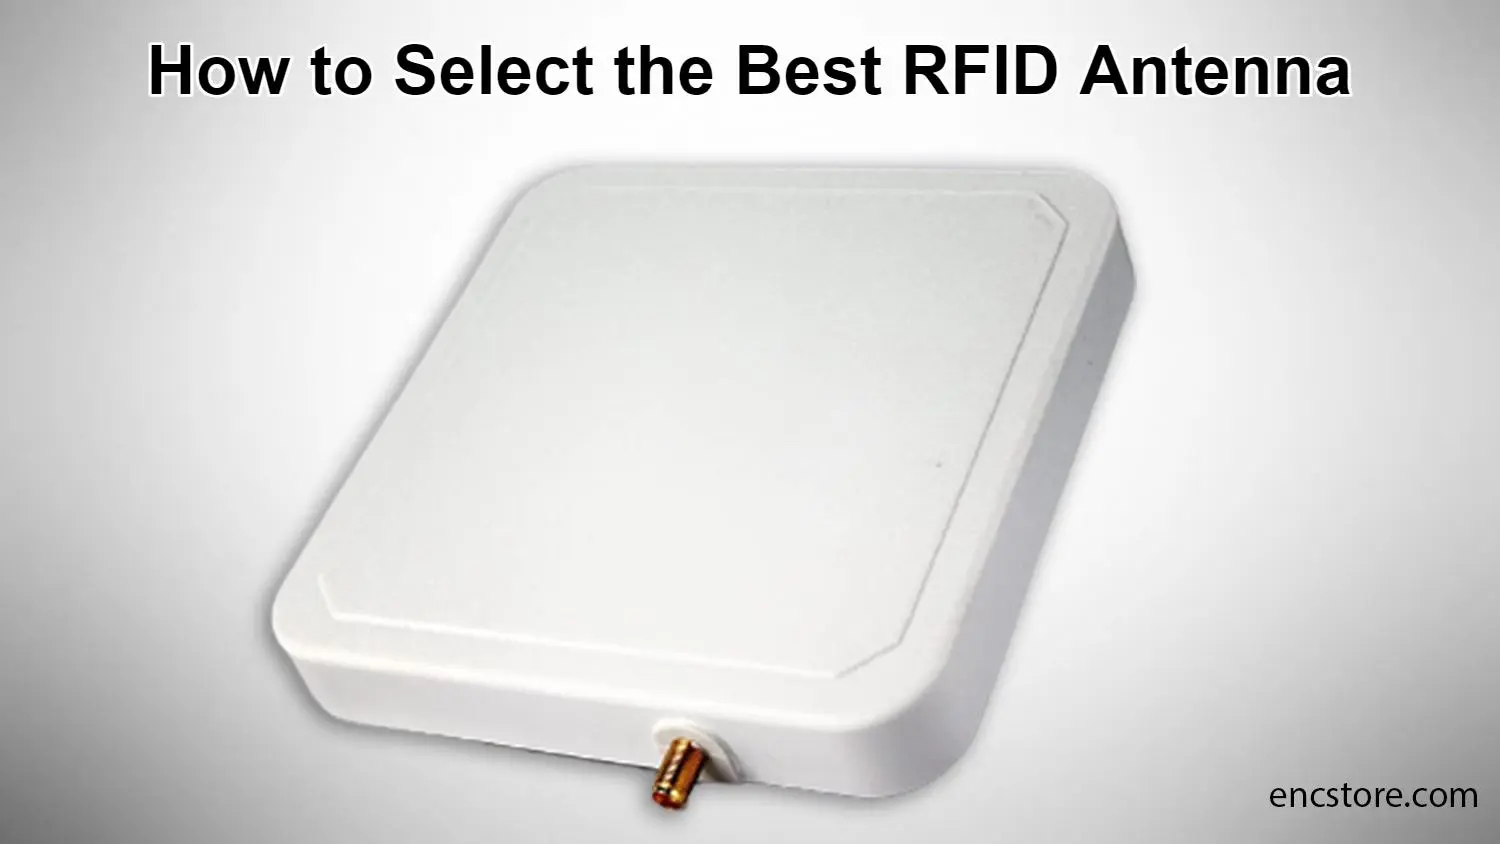 How to Select the Best RFID Antenna